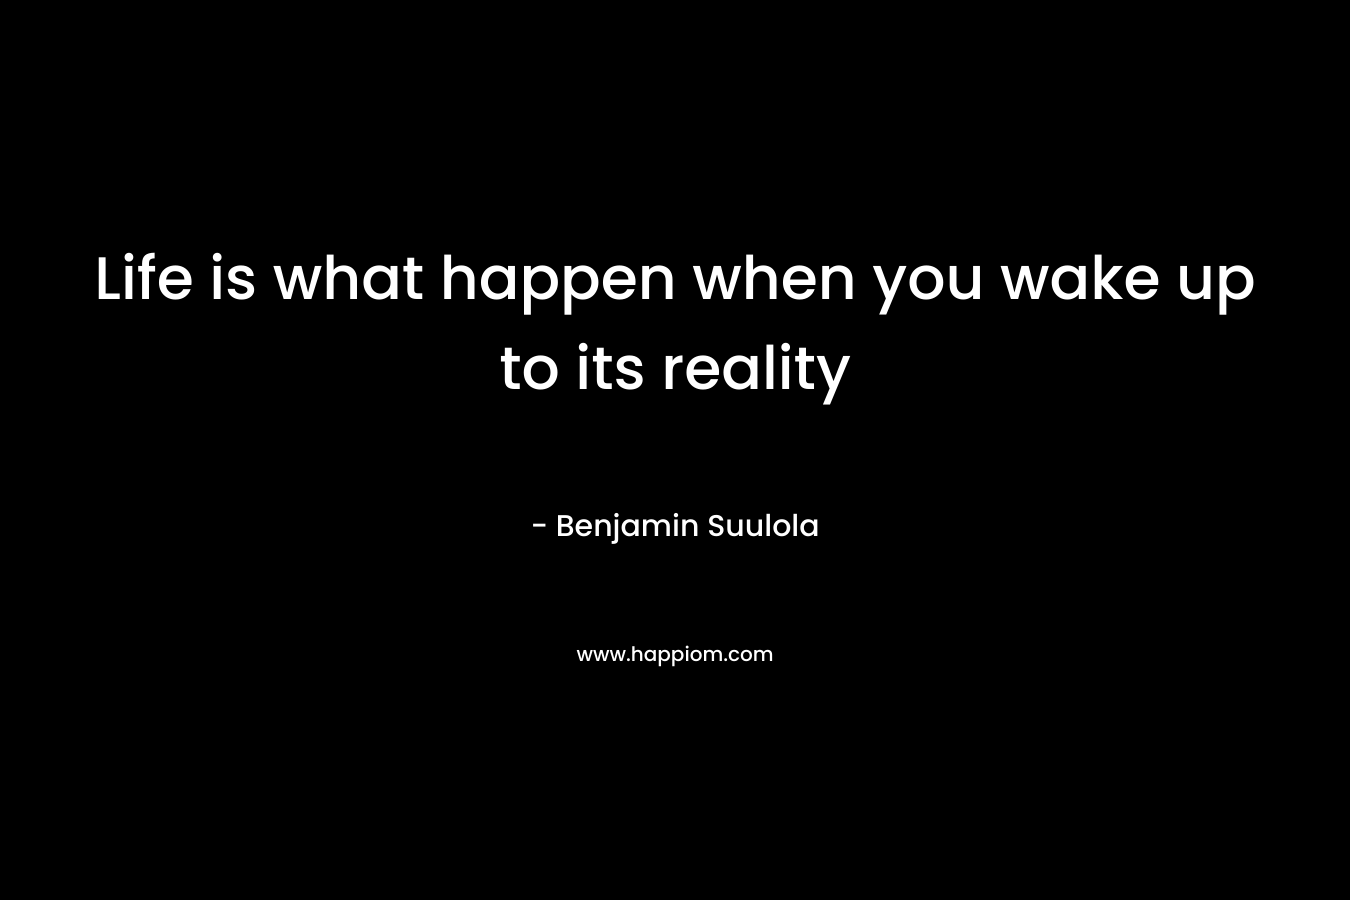 Life is what happen when you wake up to its reality